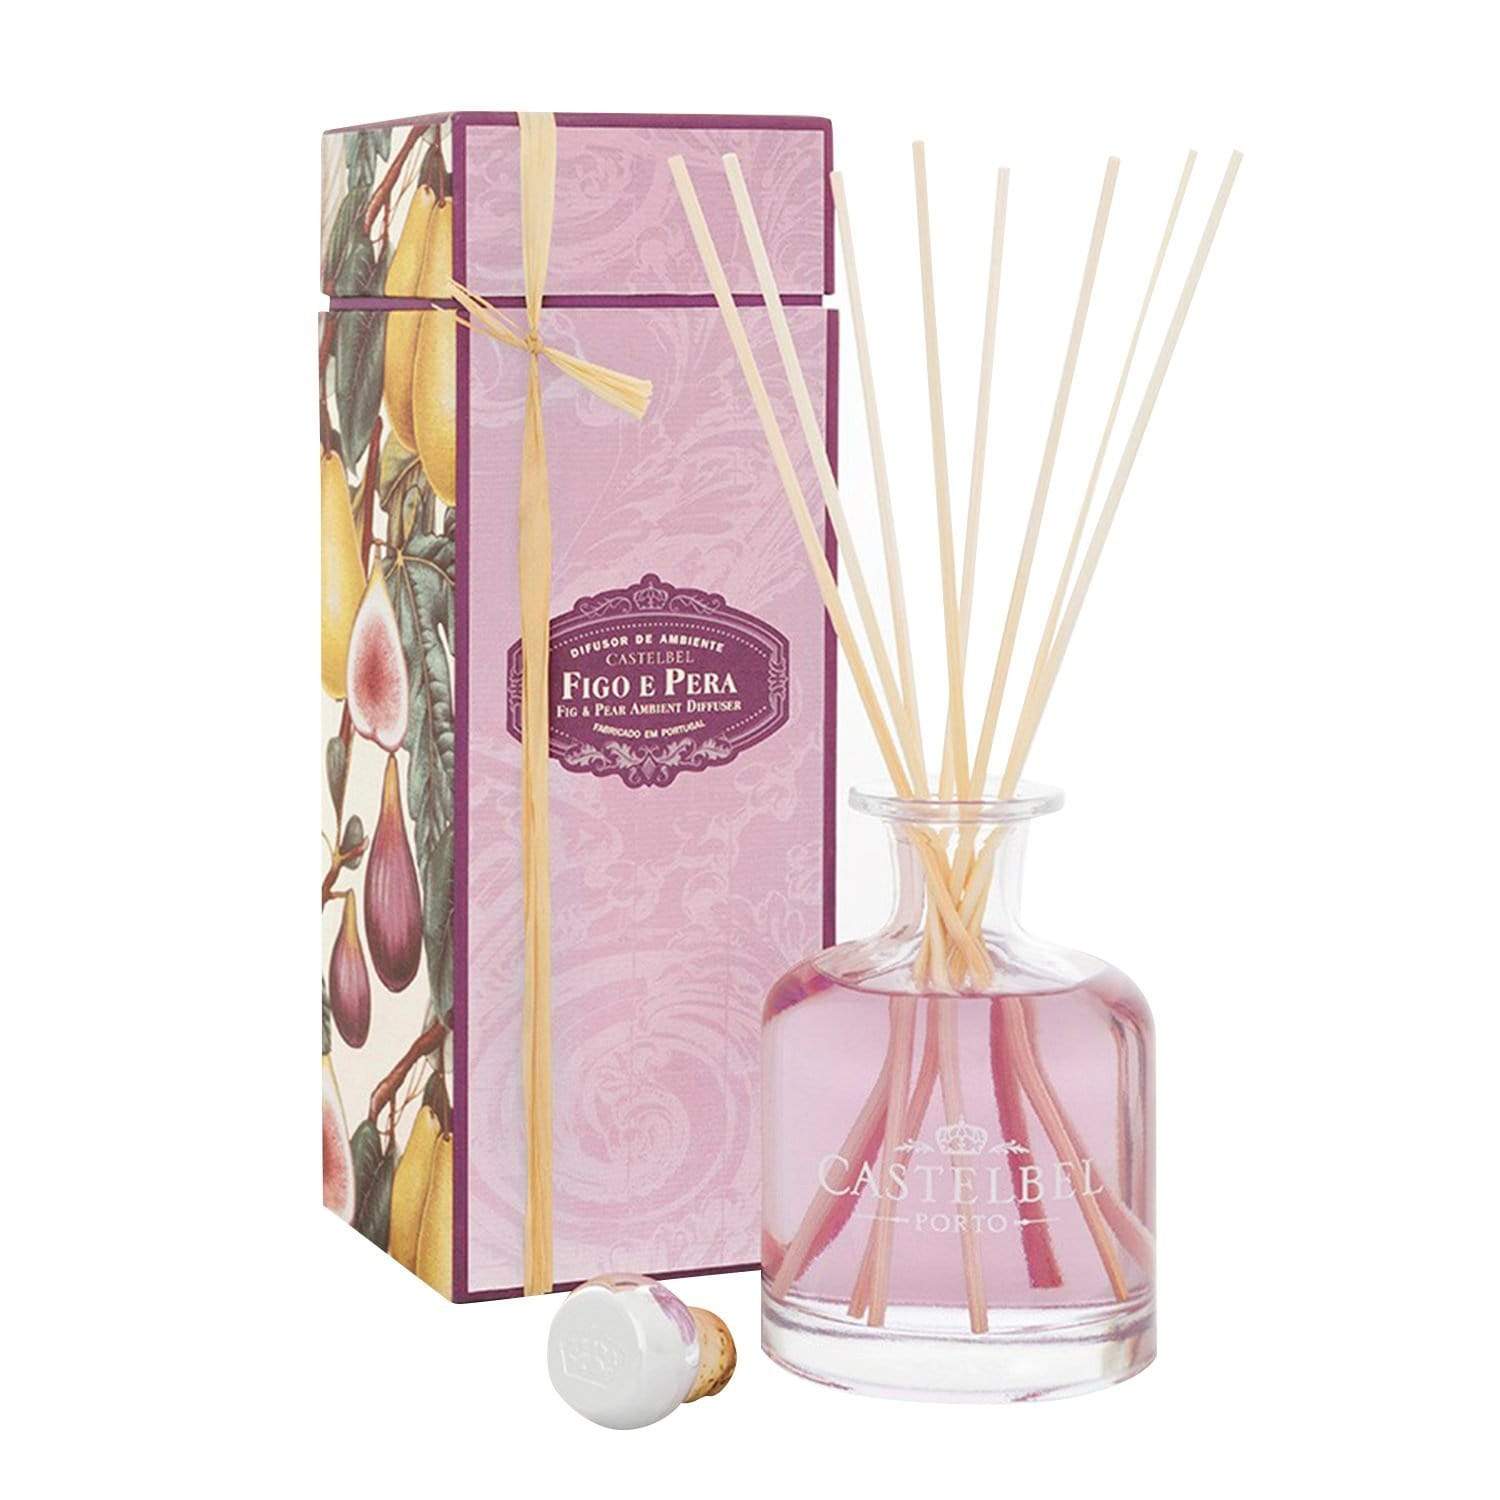 Castelbel Amber Fig and Pear Reed Diffuser - 250ml - C1-0304 - Jashanmal Home